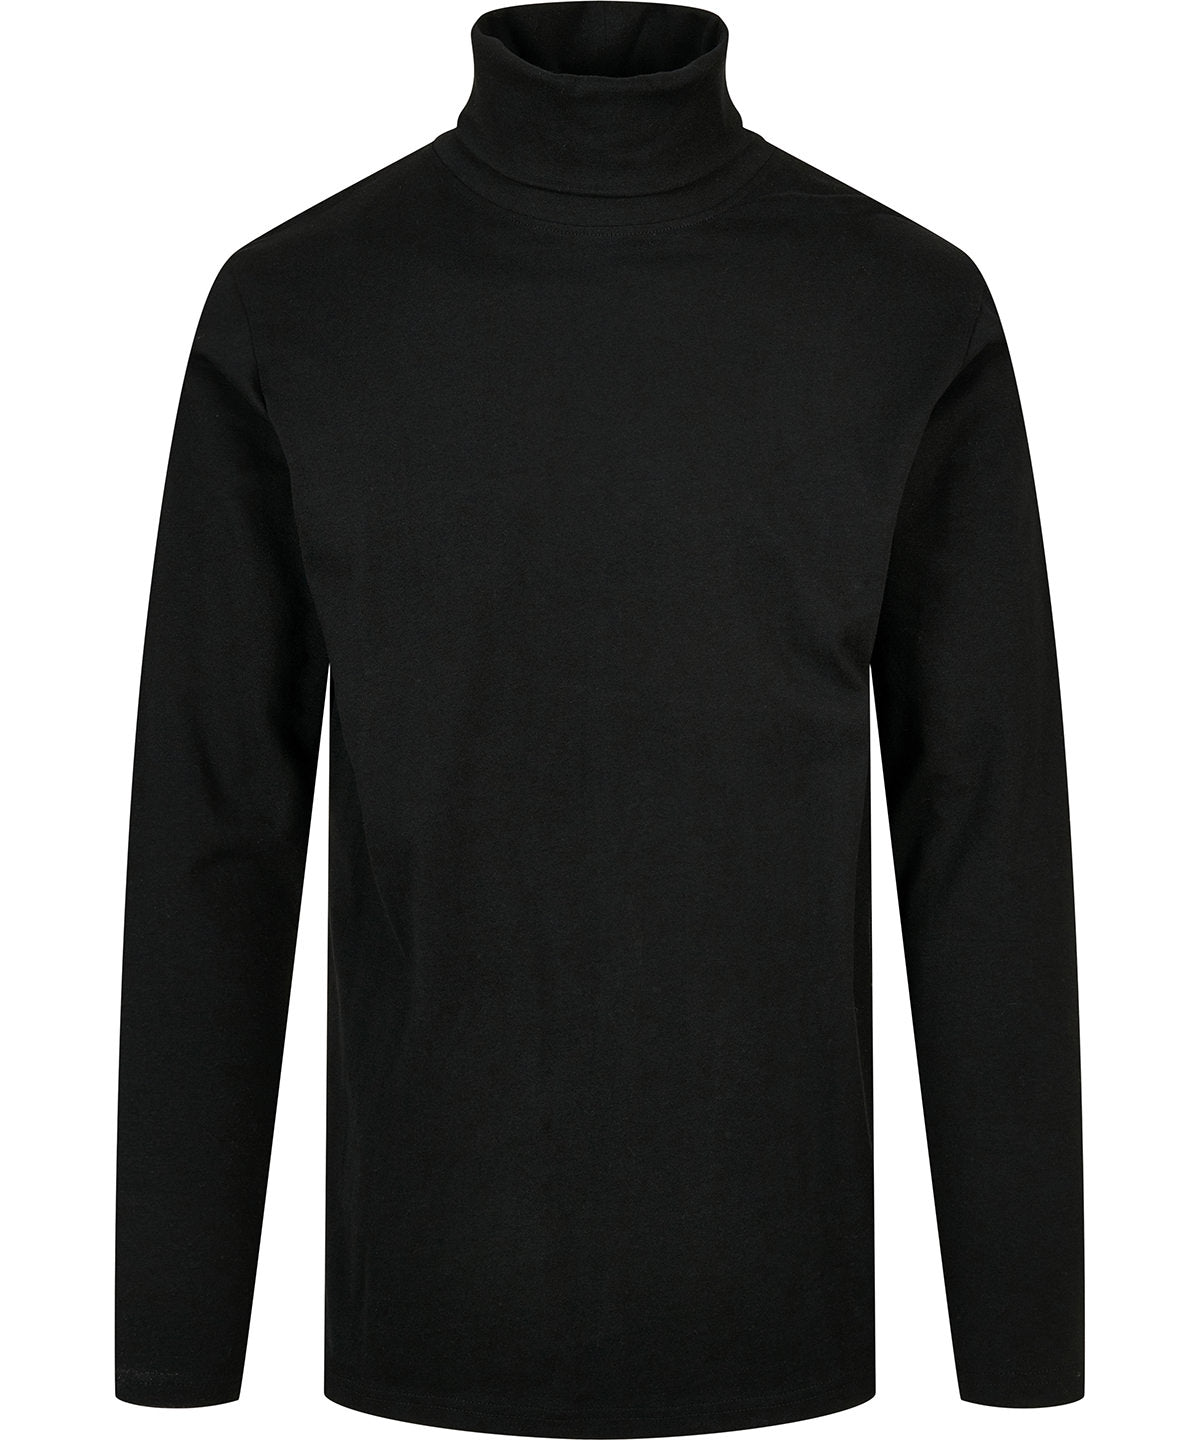 Build Your Brand Turtle Neck Long Sleeve